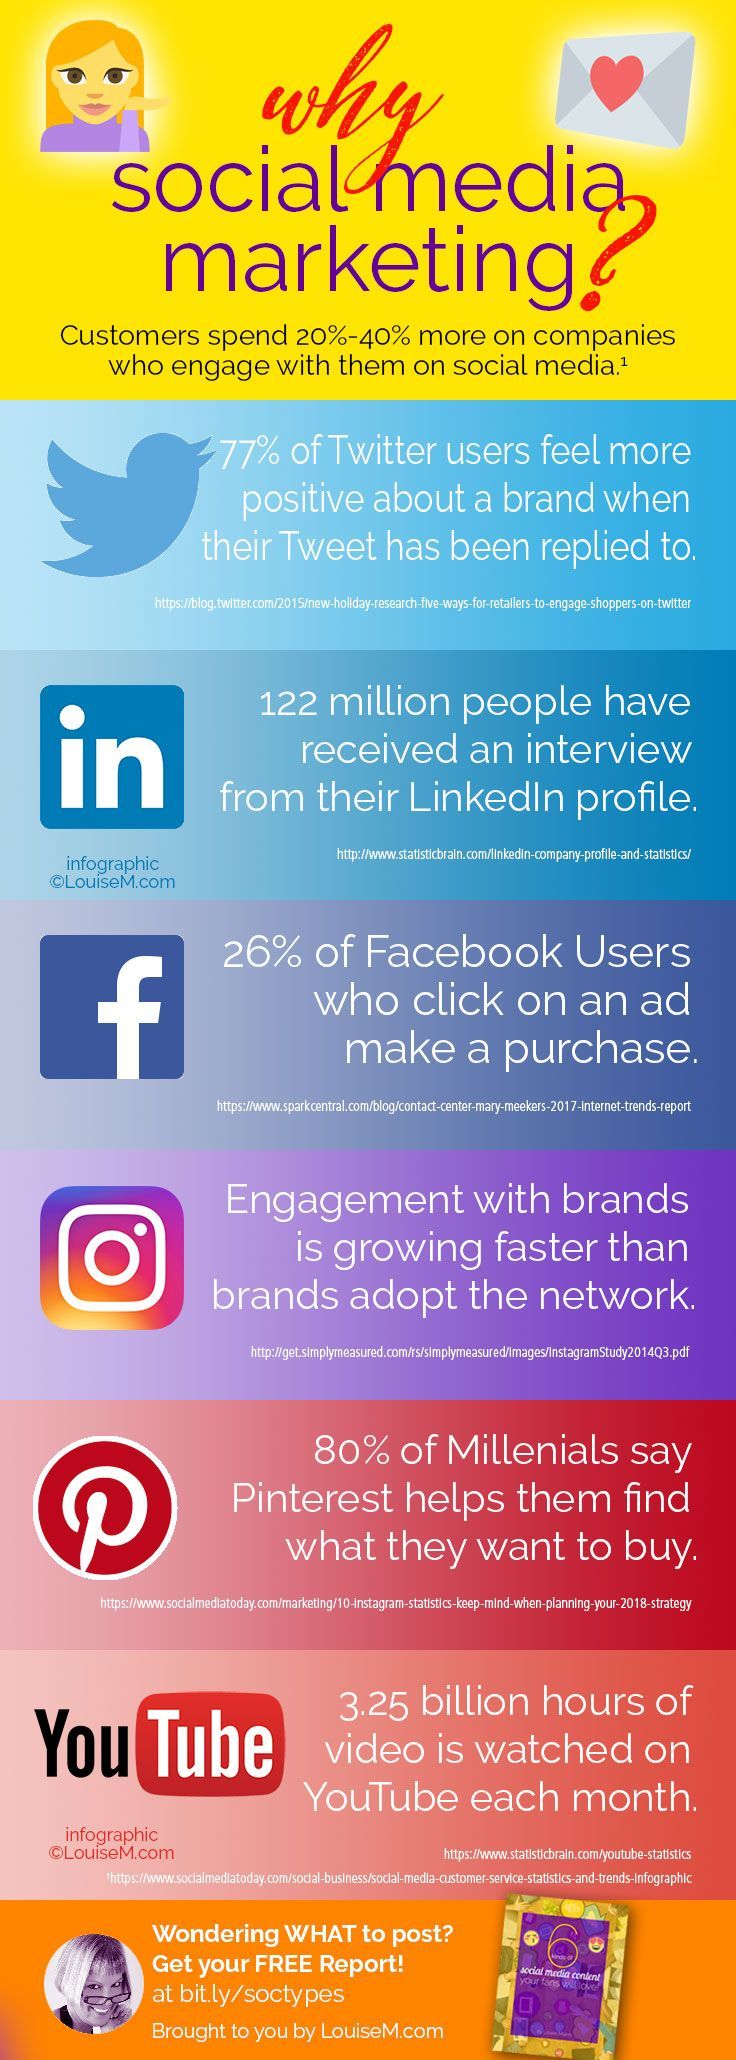 Marketing-Infographic-Top-stats-on-social-media-marketing-CLICK-to-visit-the-massive-roundup-of-61-SM Marketing Infographic : Top stats on social media marketing! CLICK to visit the massive roundup of 61 SM...